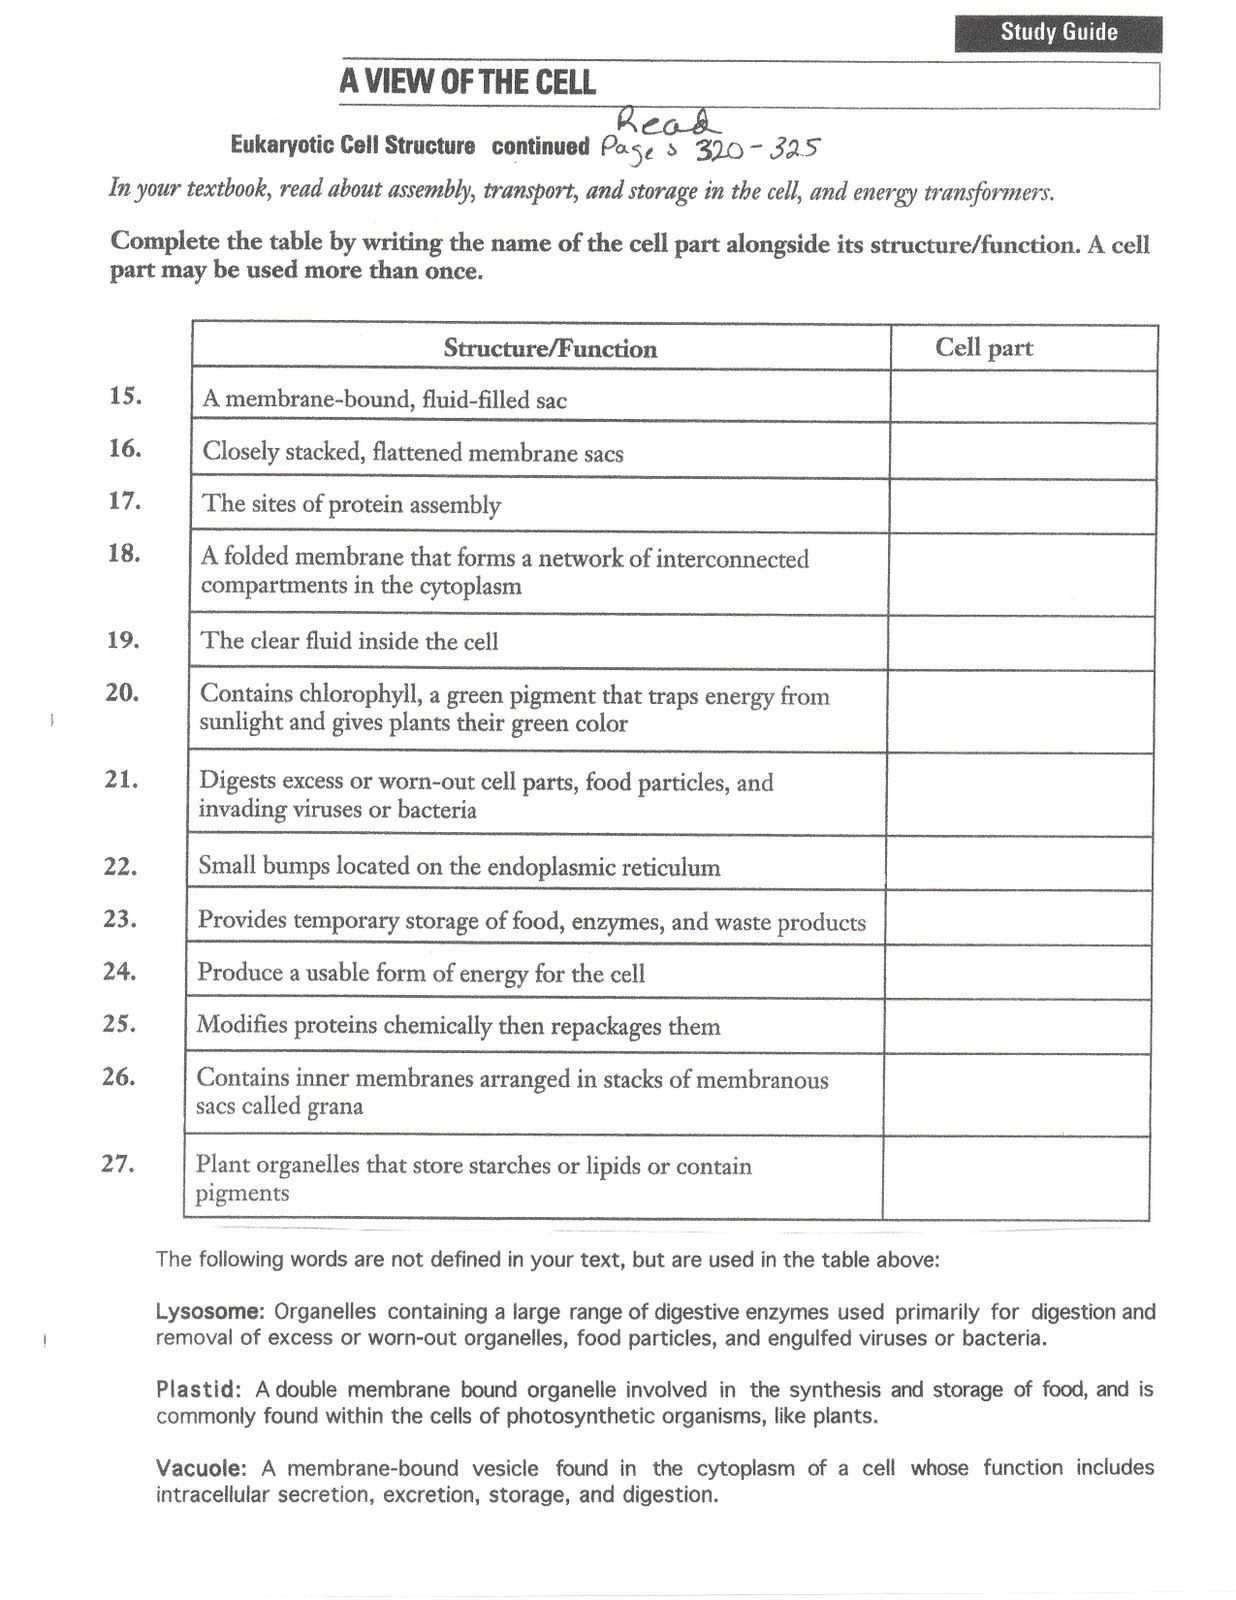 Business Cycle Worksheet Answer Key together with Animal Cell Essay Pare and Contrast Essay Conclusion Example